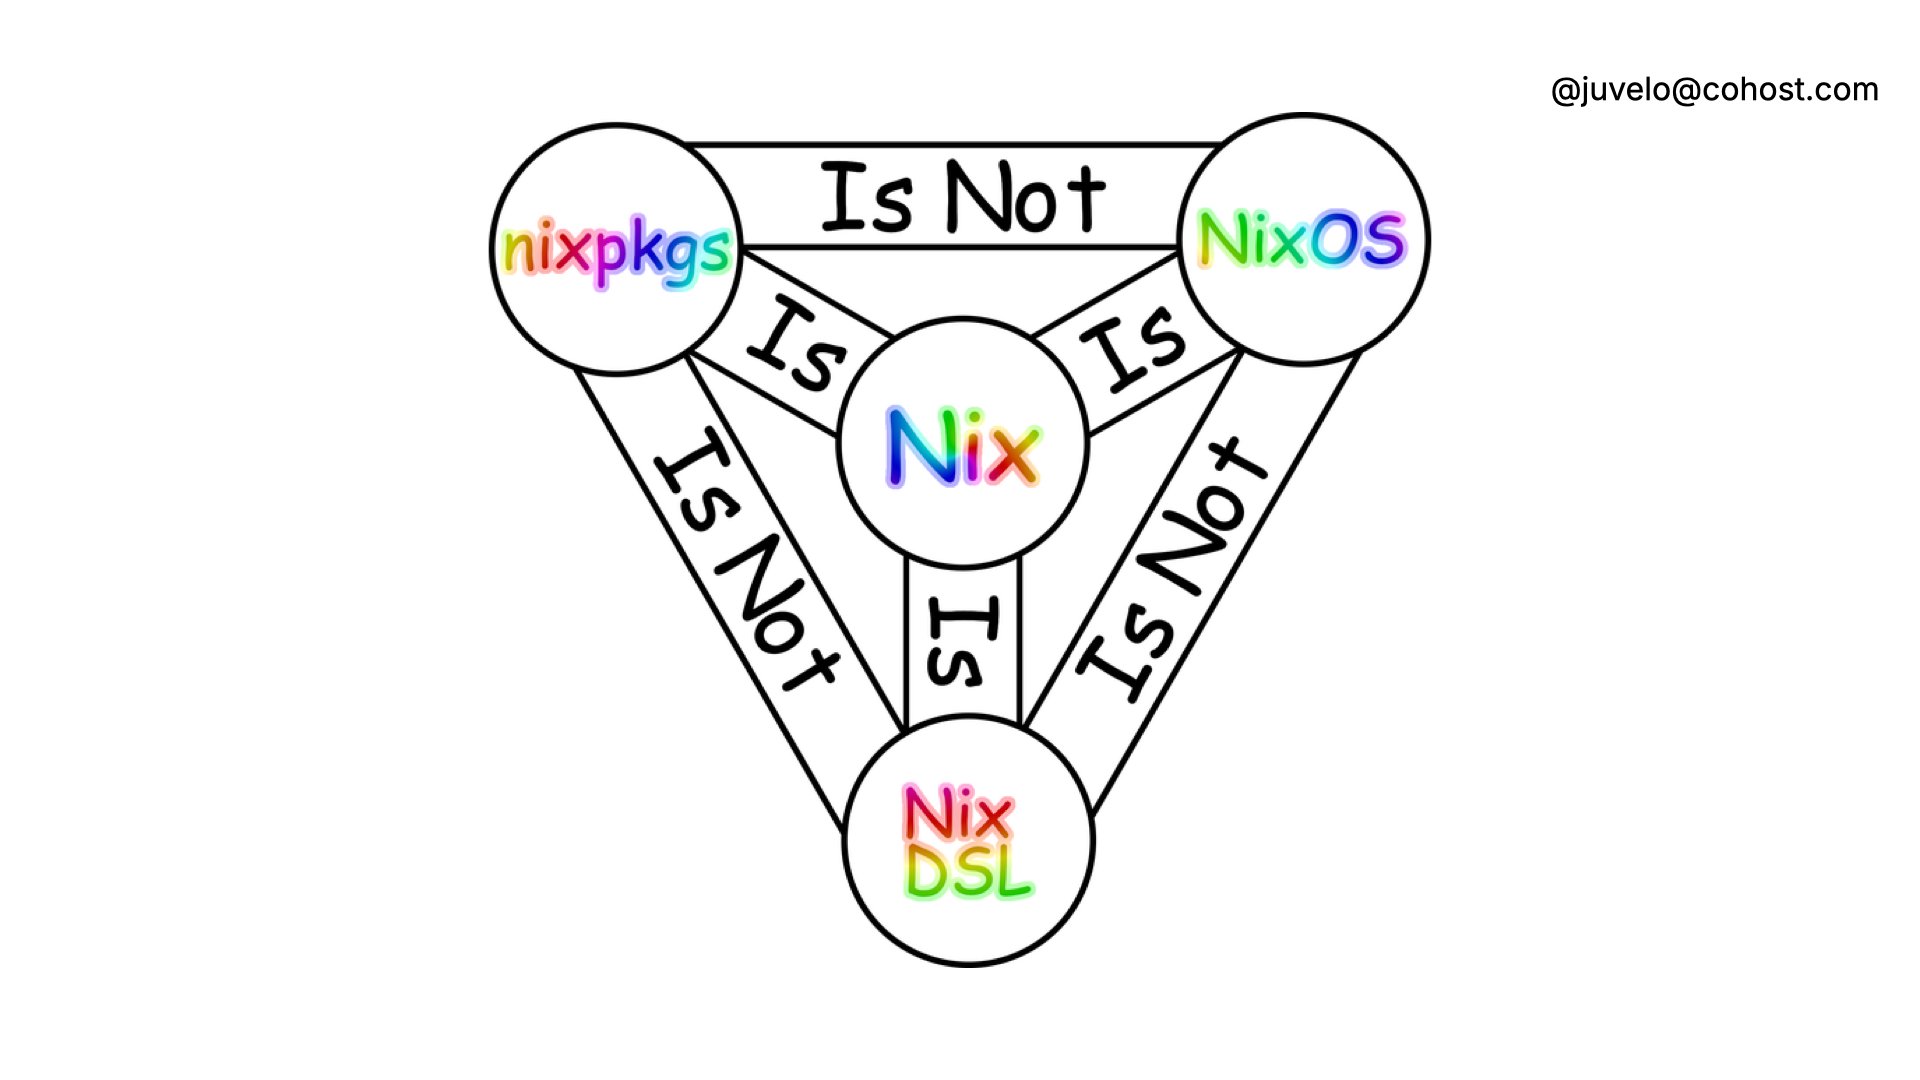 The holy trinity of Nix, showing that Nix the language, the package manager, and the OS are different facets of the same thing.